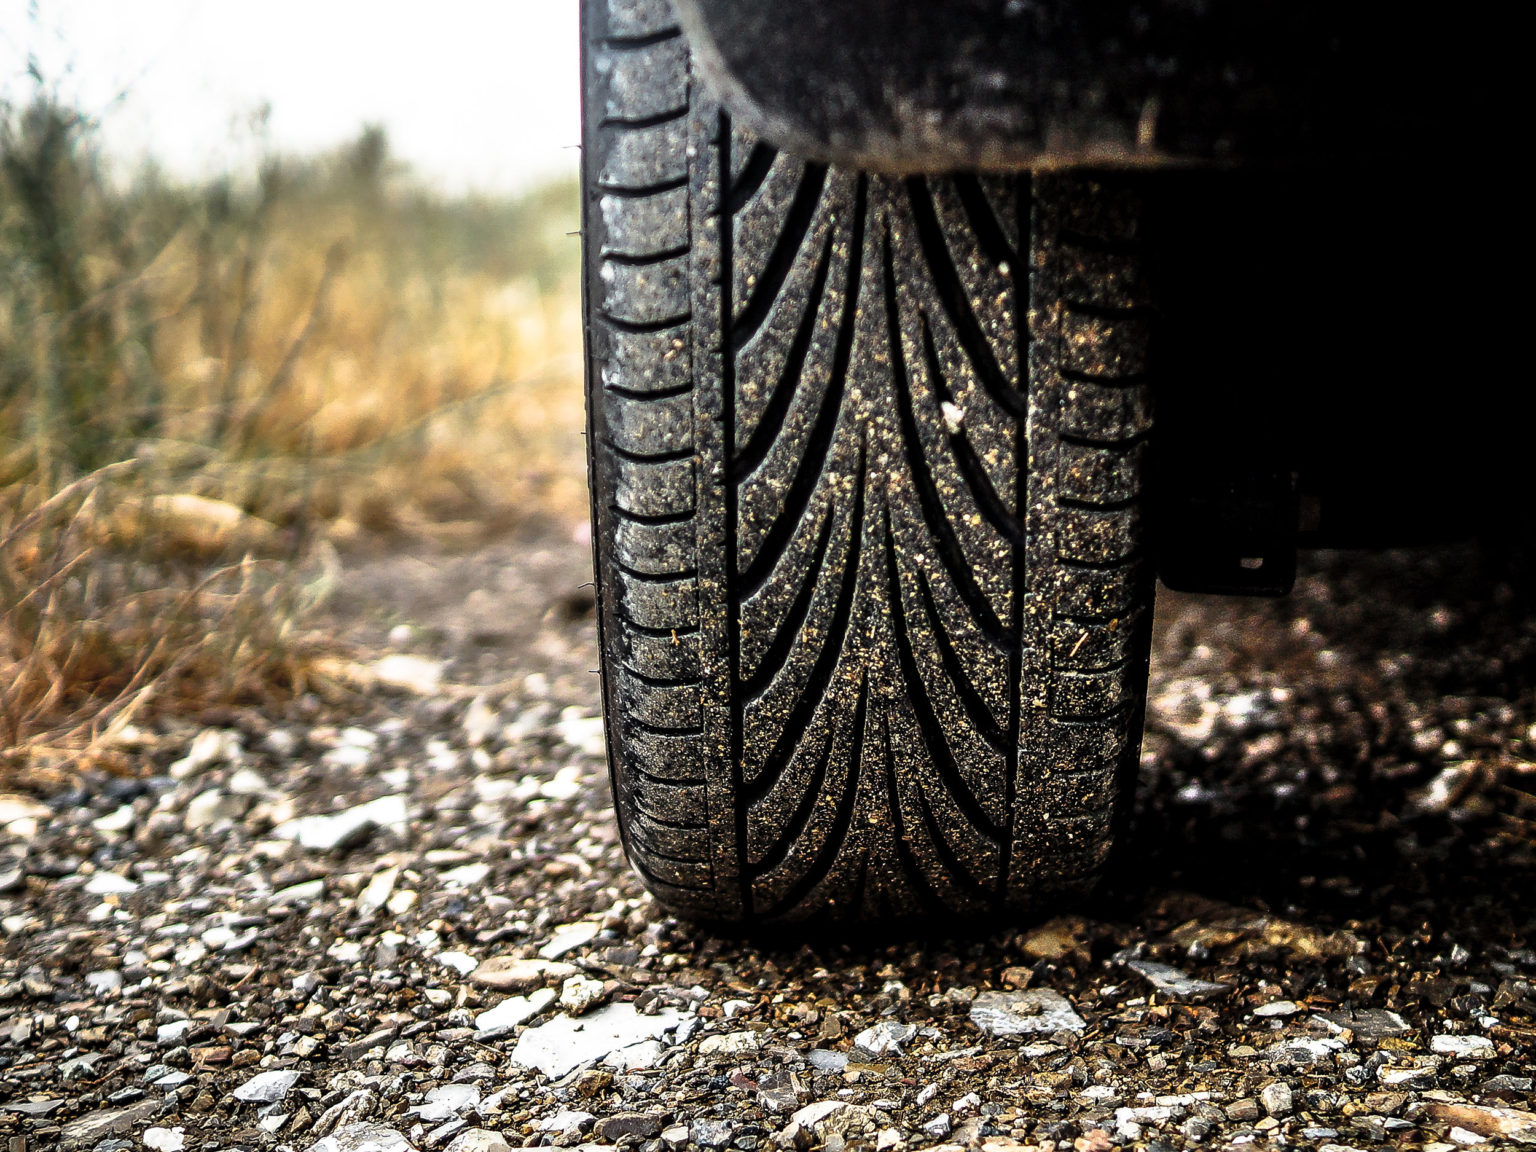 When tires come into contact with the road surface, they release pollutants.